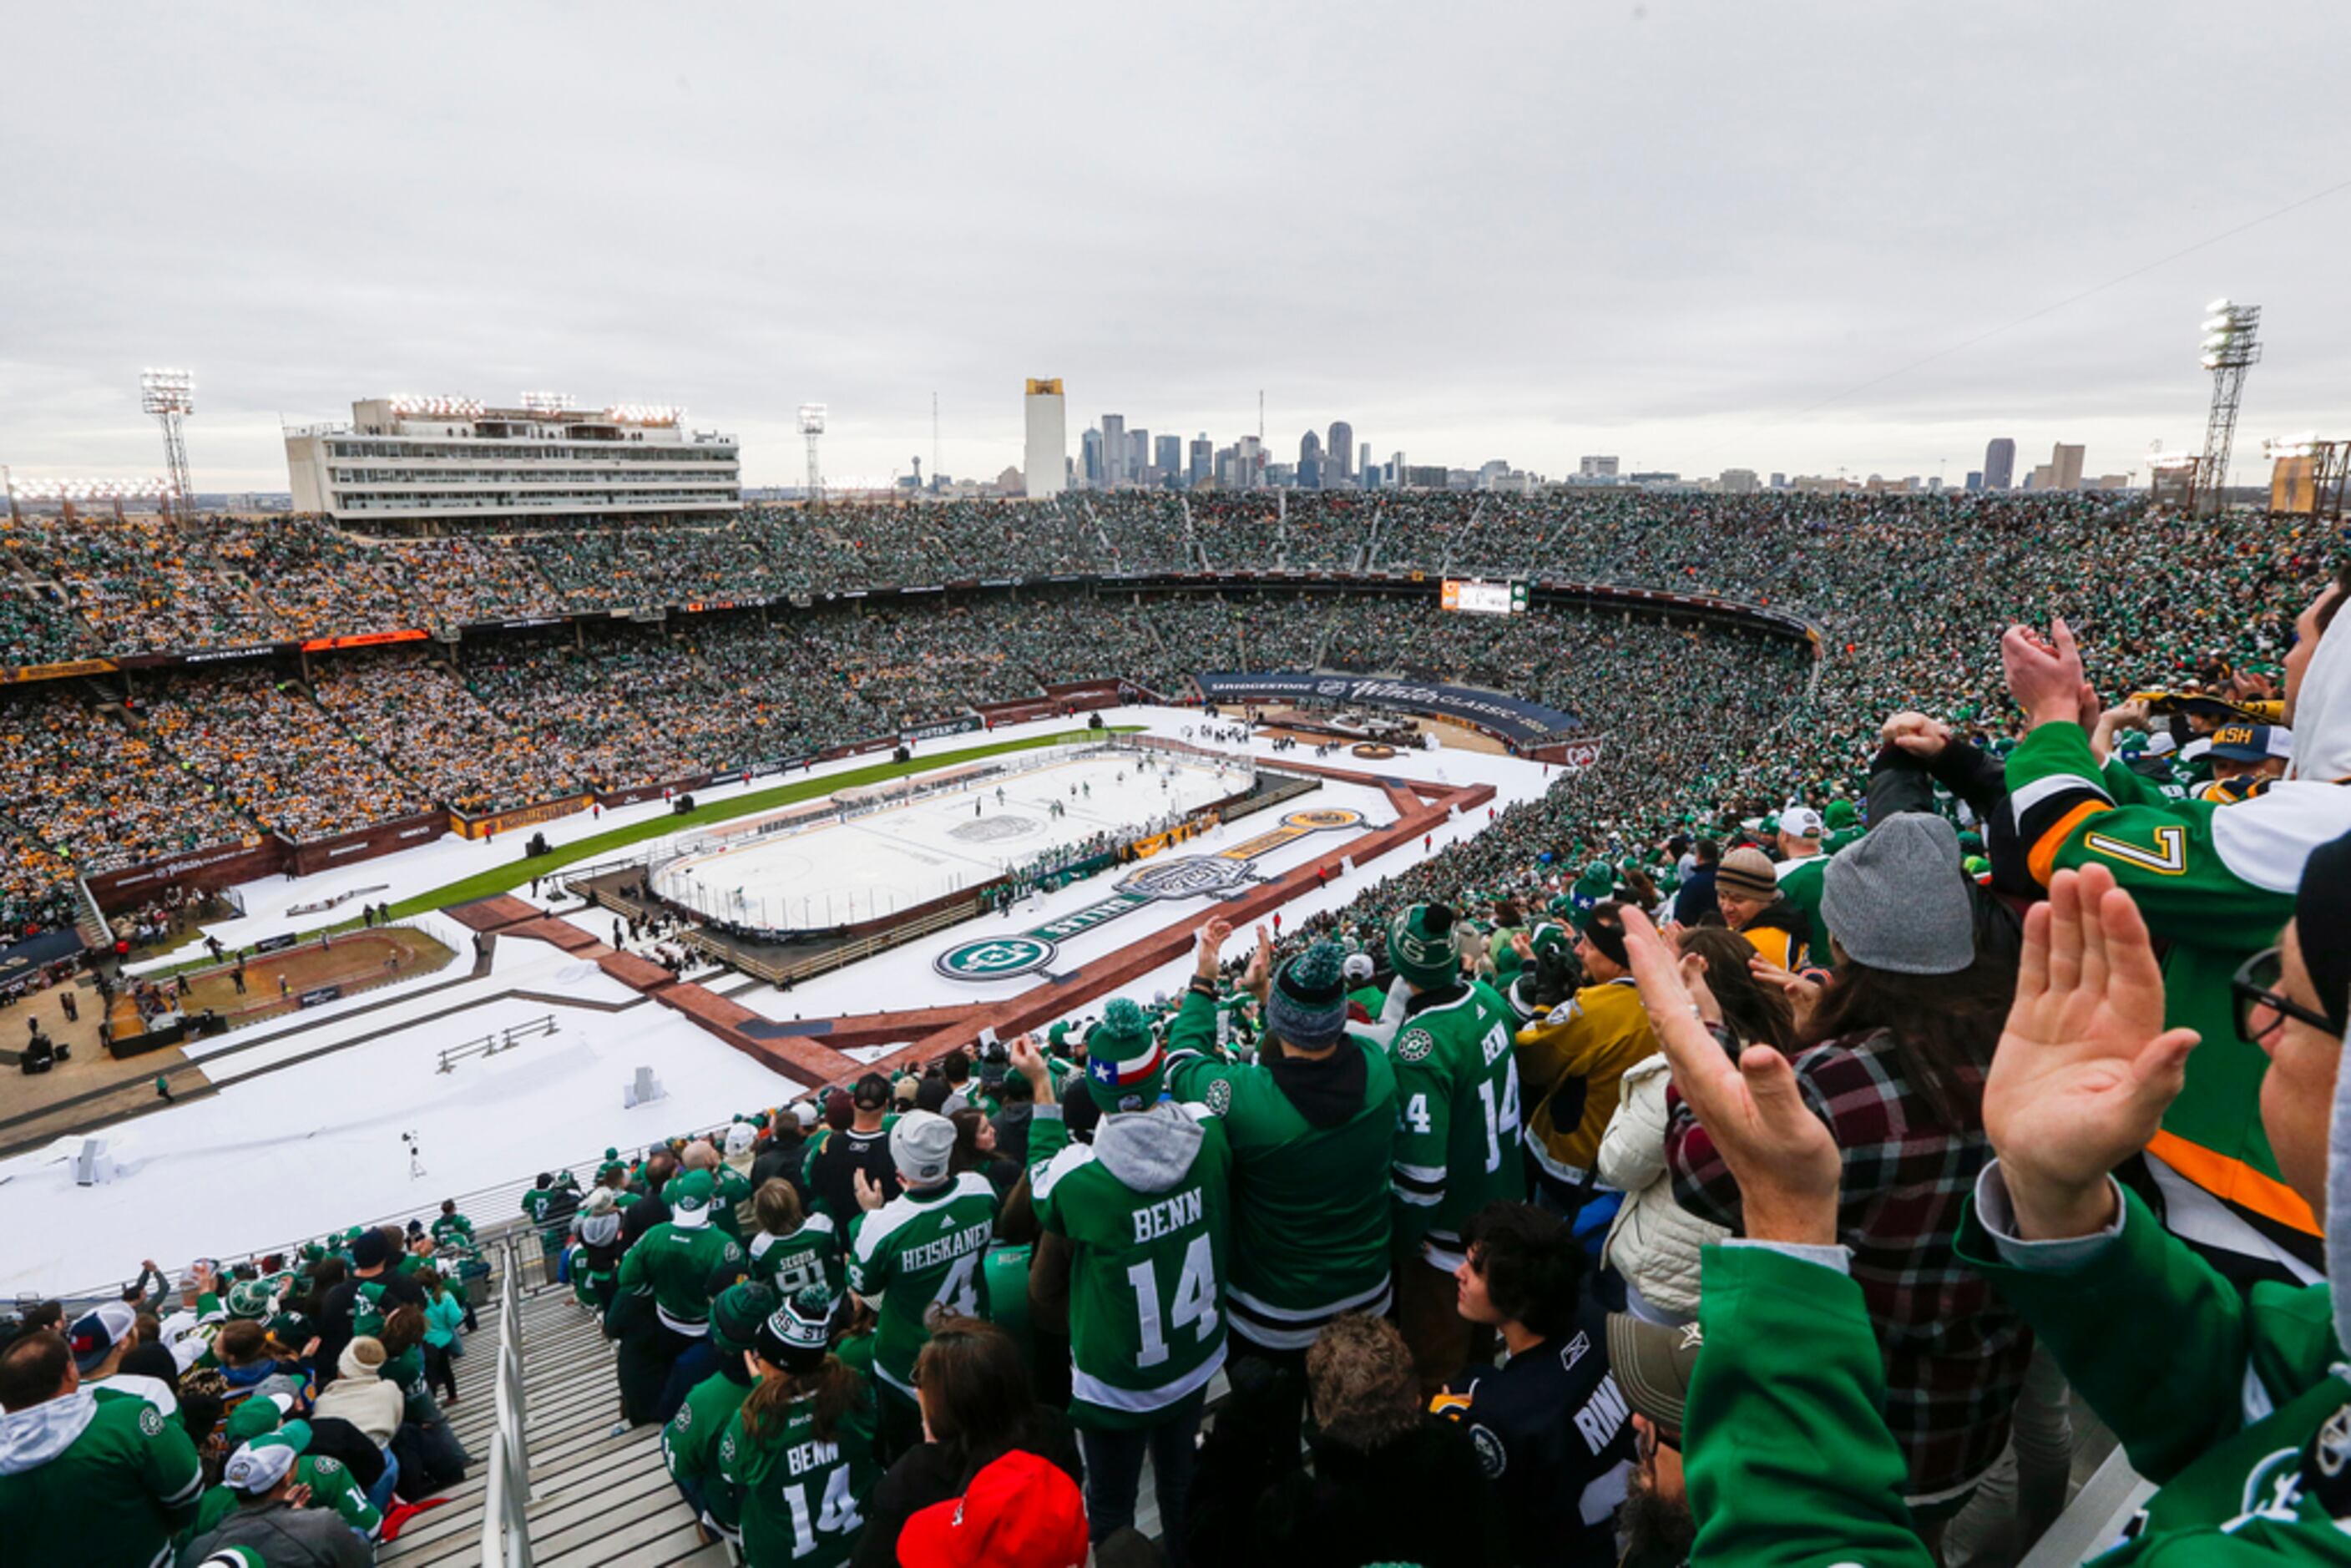 NHL Winter Classic To Be Played In Dallas In 2020 – Old Gold & Black